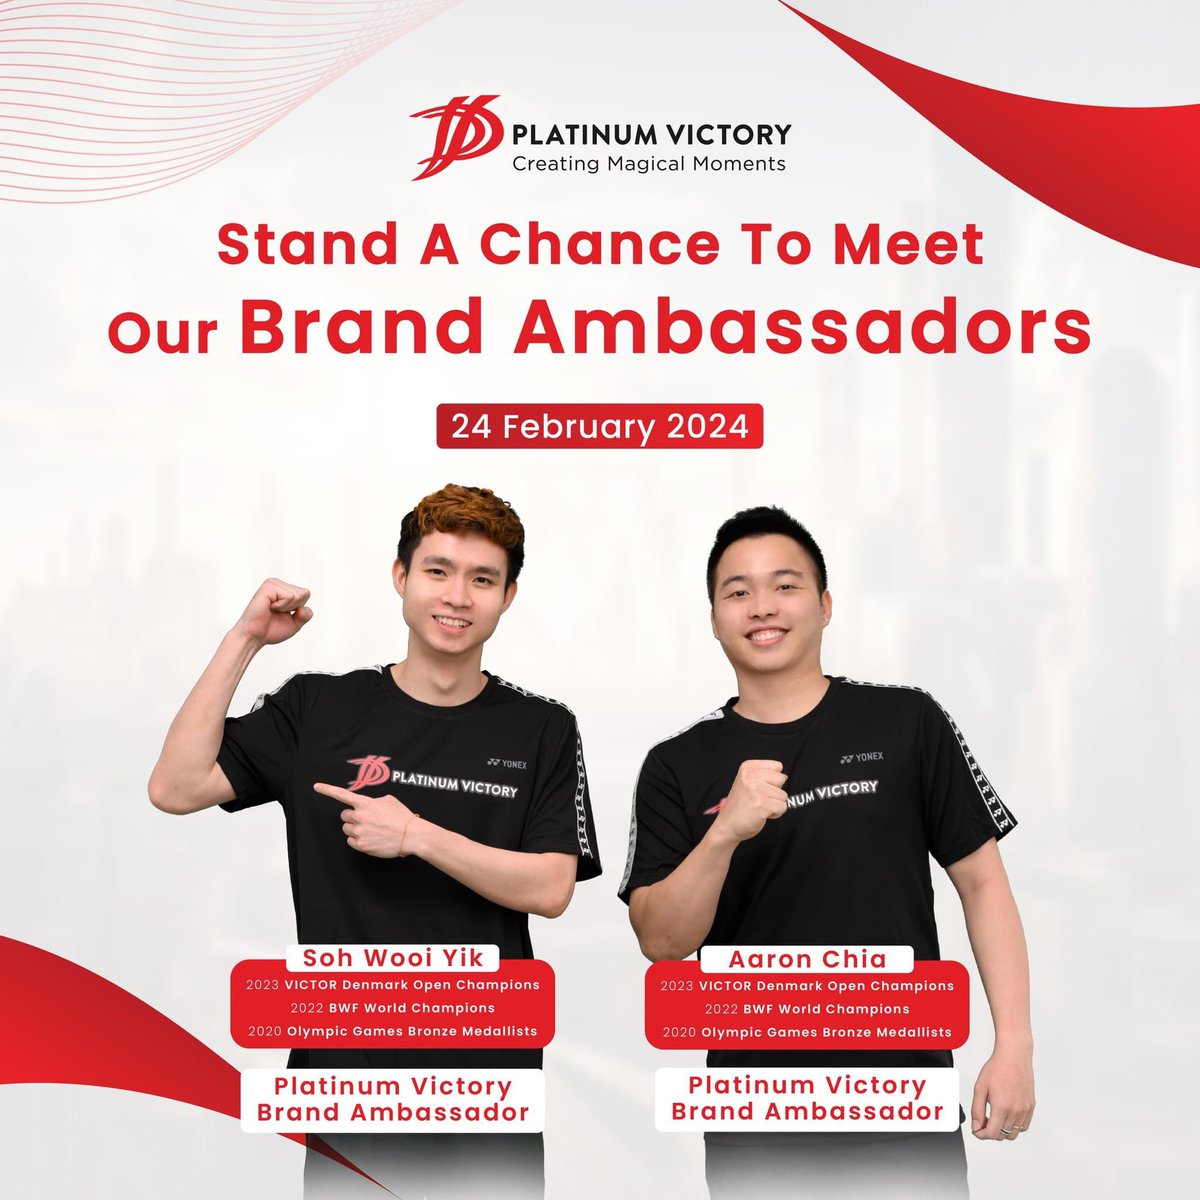 Meet & Greet for @AaronChia24 & @sohwooiyik ‼️ 

Step into the festive spirit with us and seize the opportunity to meet our brand ambassadors Aaron Chia Teng Fong 谢定峰 and Soh Wooi Yik 苏伟译! 

Join us at PV22 Sales Gallery at The Ark for an unforgettable Chinese New Year